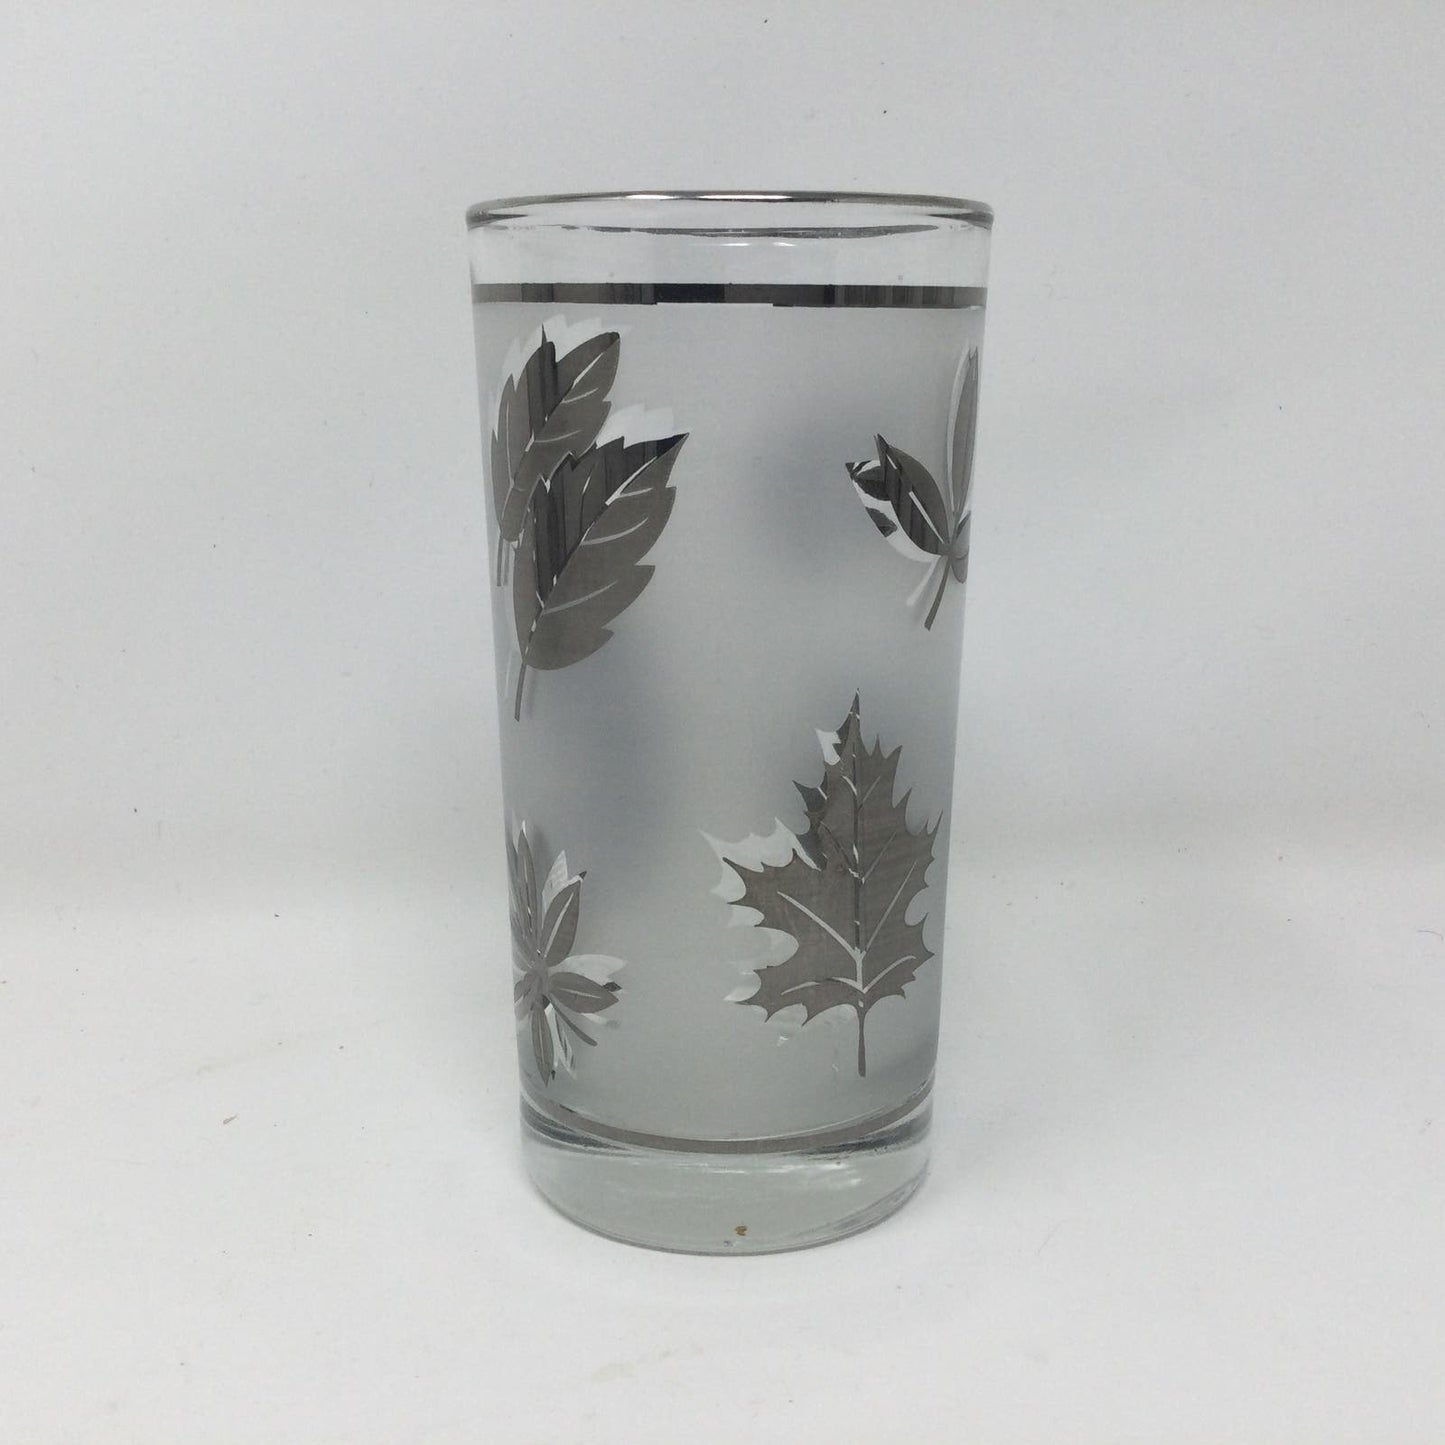 Libbey Starlyte Frosted Silver Leaf Glasses Foliage Set of 8 With Carrier